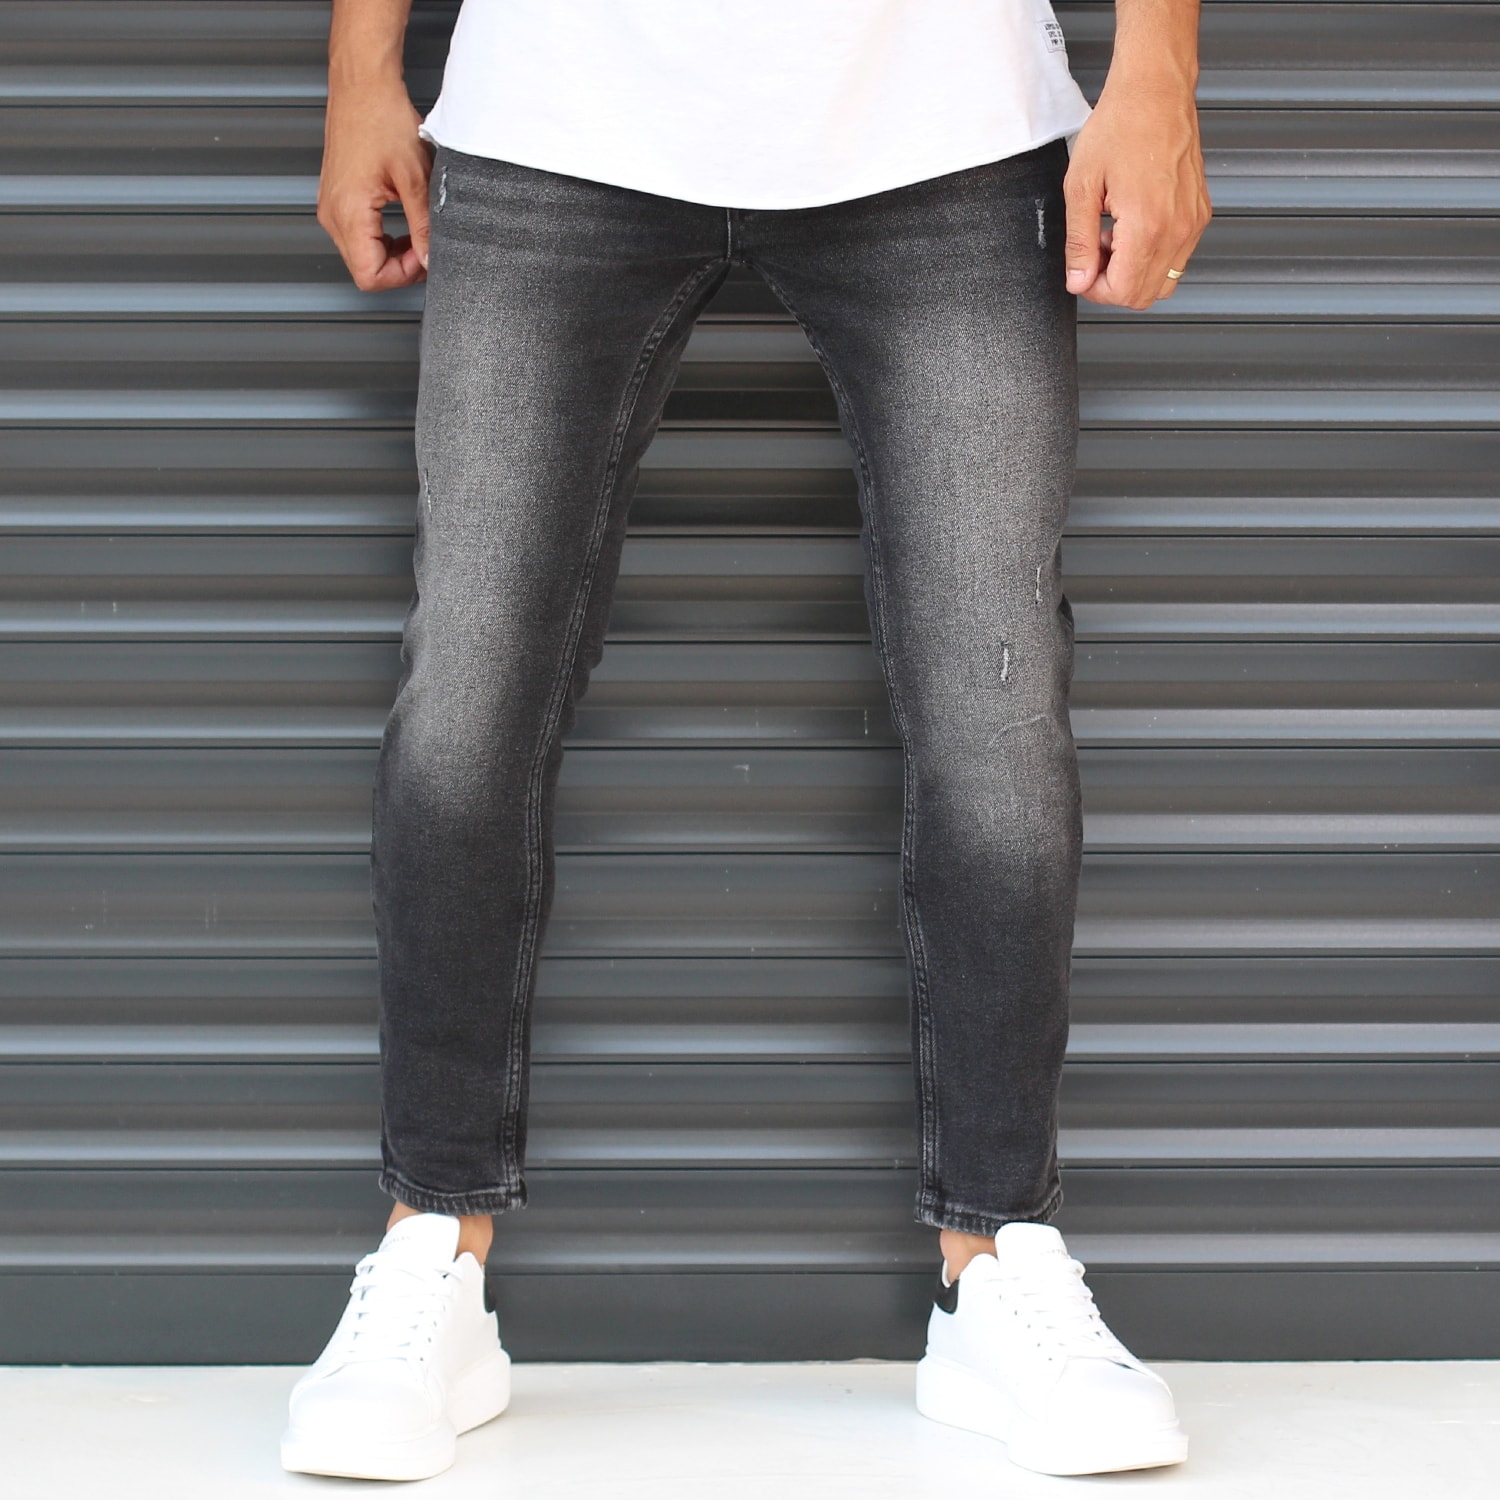 black stone washed jeans mens